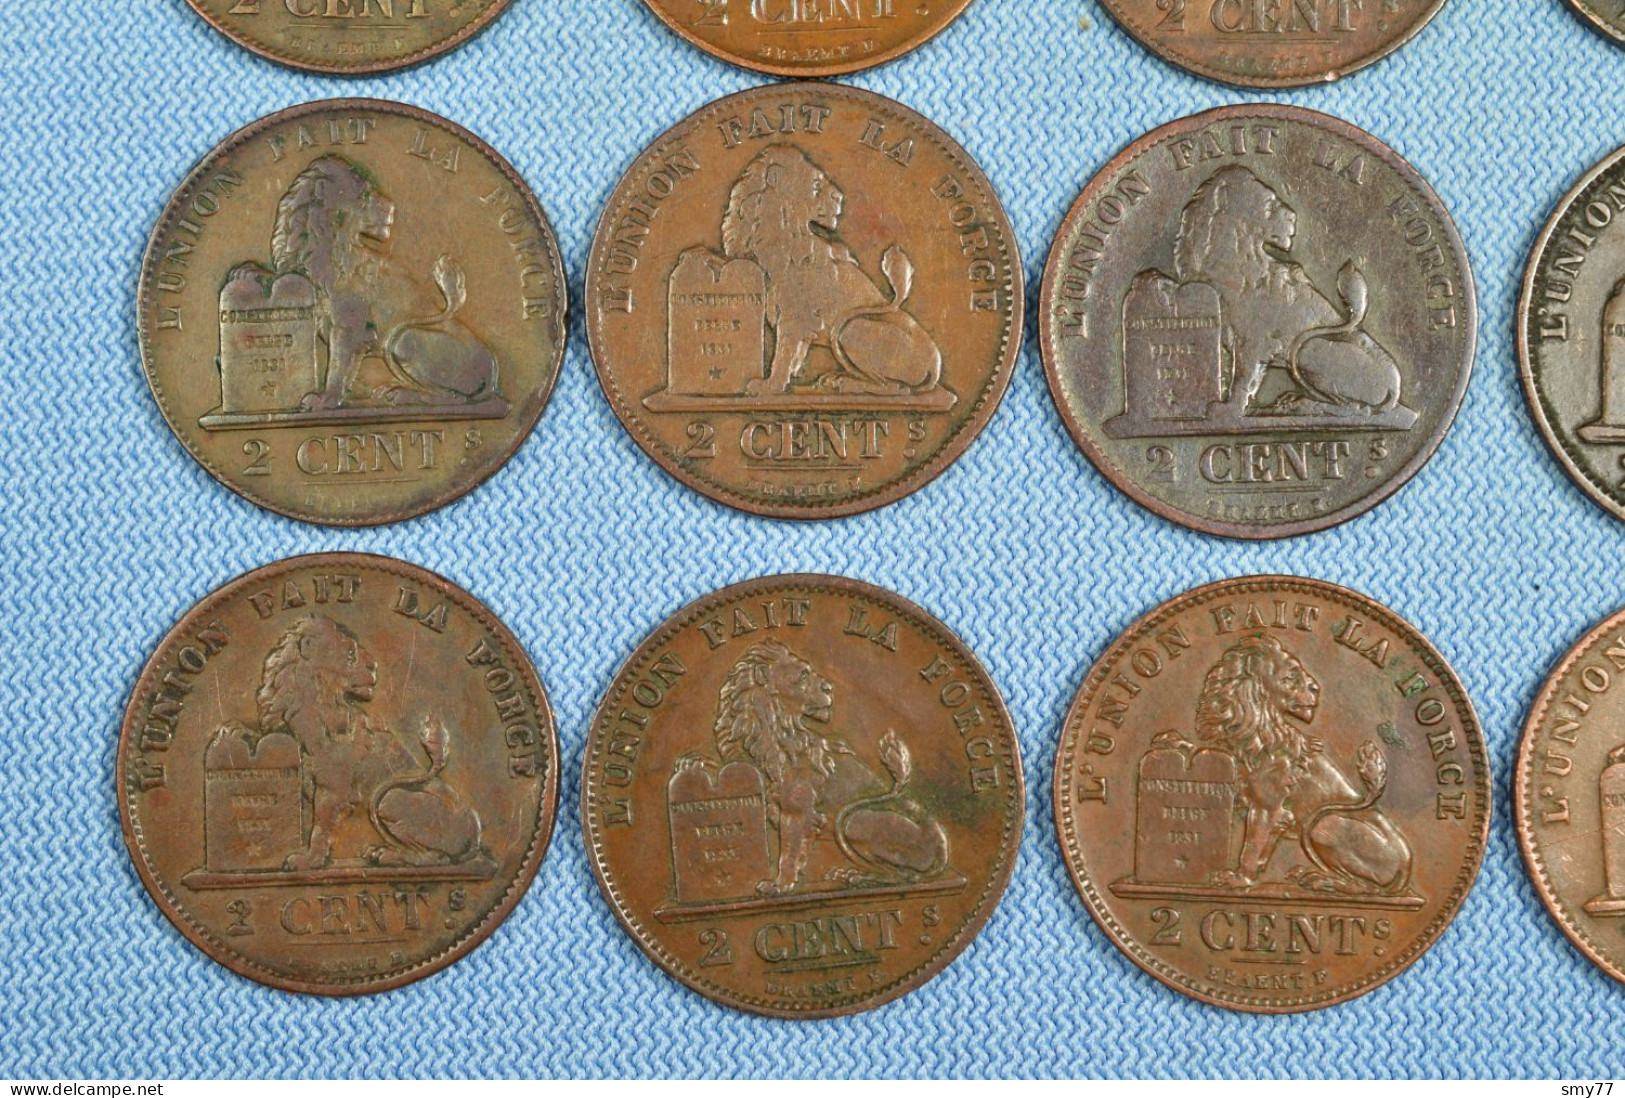 Belgique / Belgium • 21x • 2 centimes • ≥ 1835 • All different • some scarcer dates, overdates or high grades • [24-623]